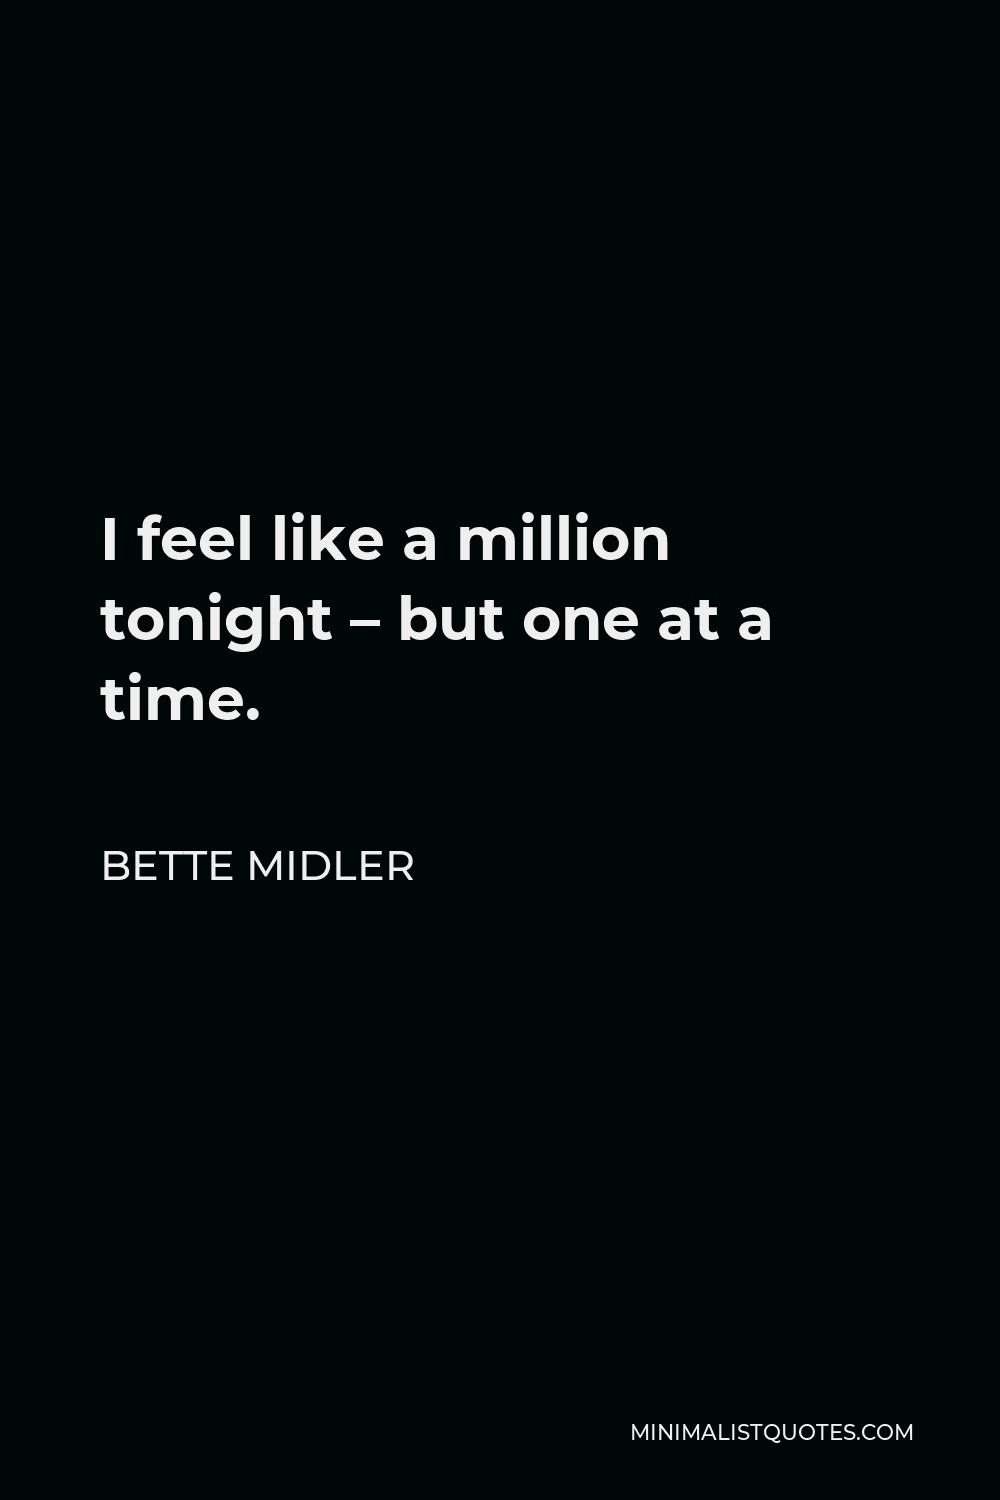 Bette Midler Quote - I feel like a million tonight – but one at a time.